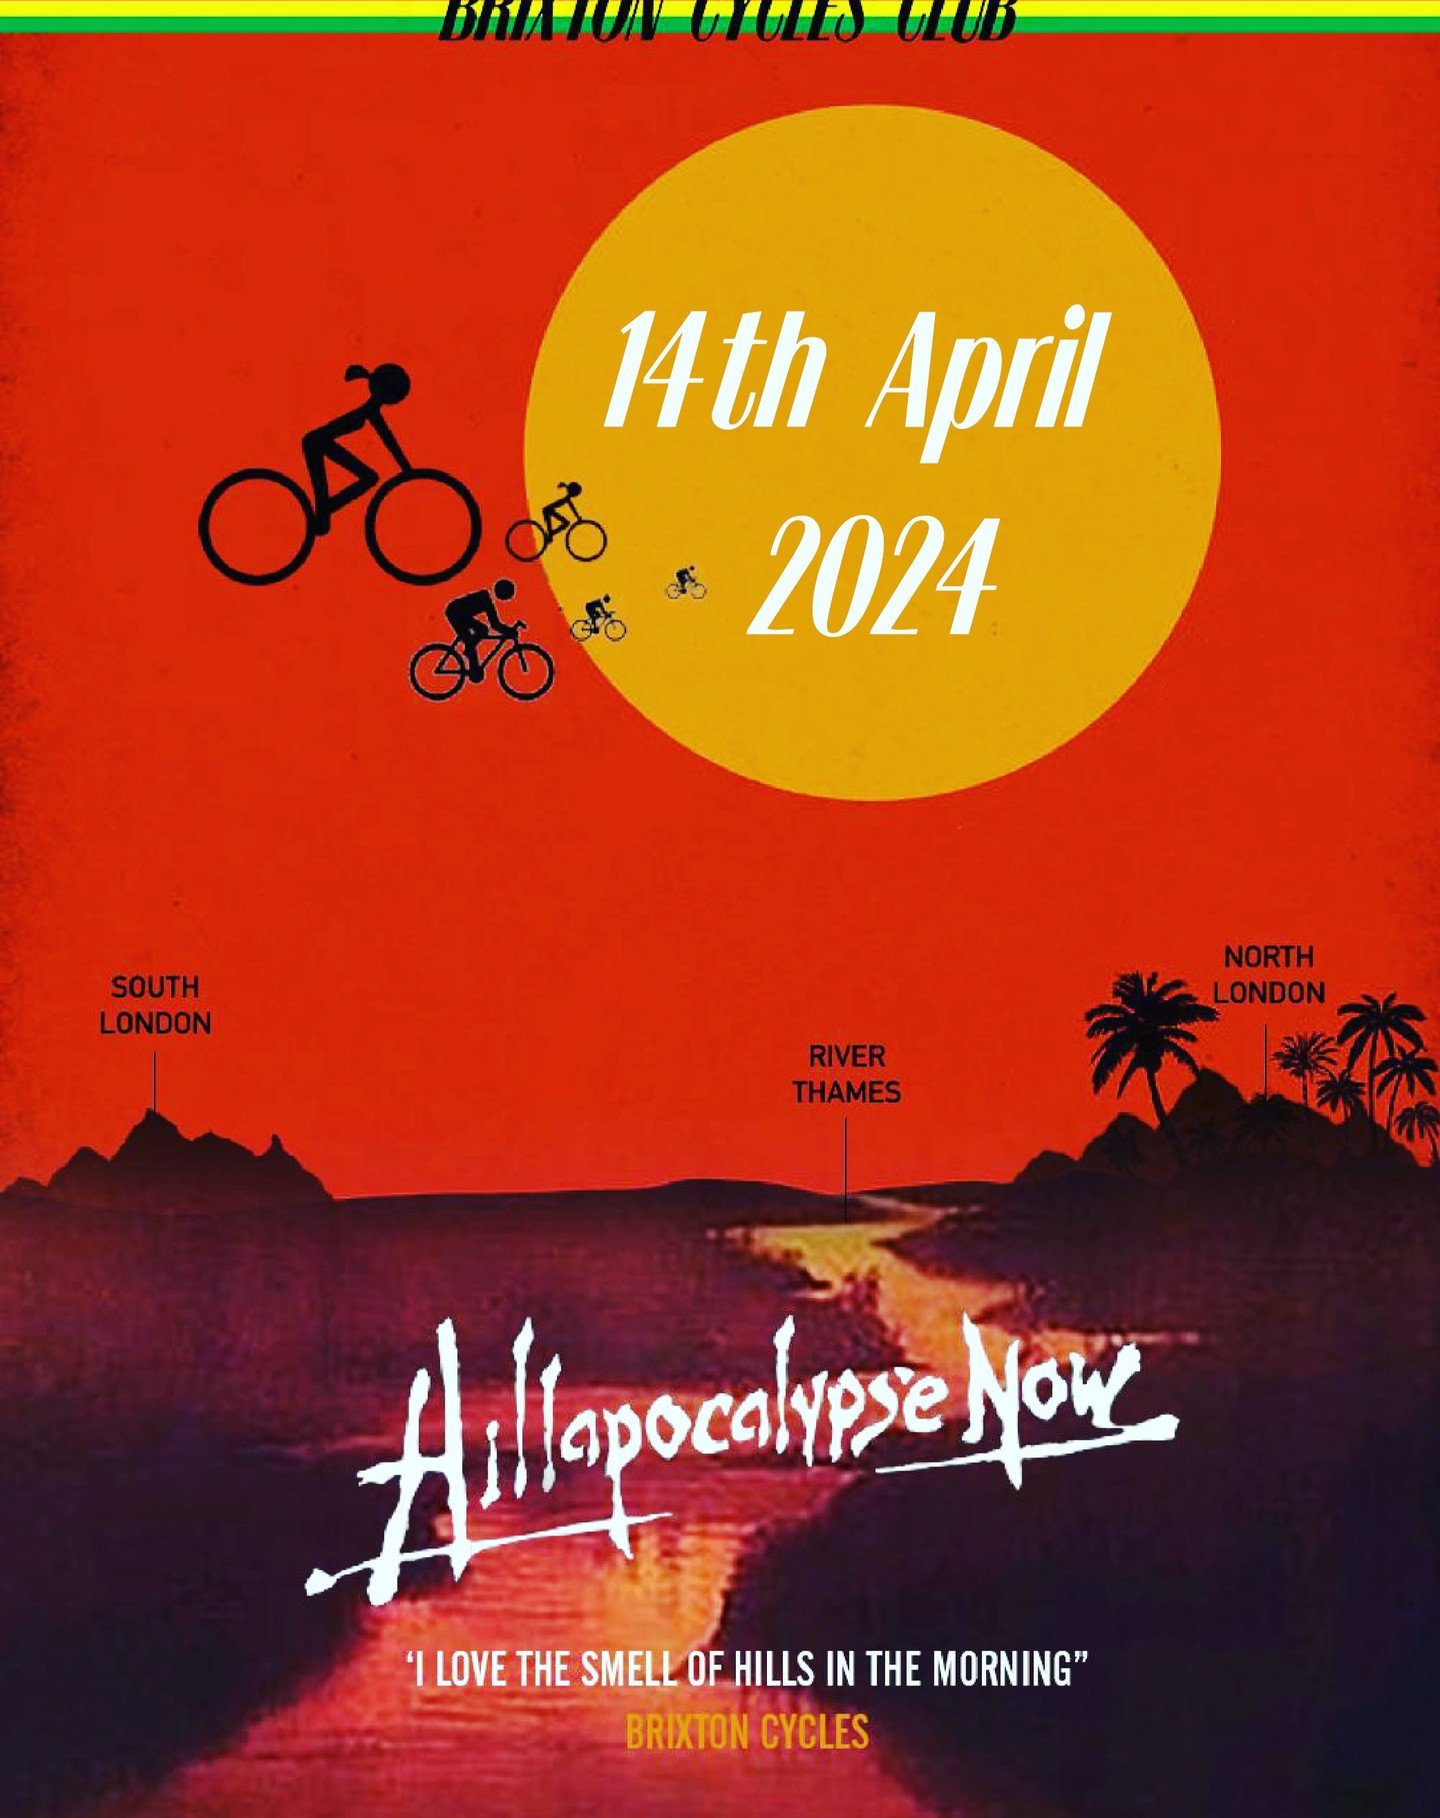 Thats right, spring has sprung and so has the annual Brixton CC Hillapocalypse event. Devised by the sadistic @statesmanwayne one of the OG's of Brixton CC and delivers 2000m plus of climbing, 130km ish. 

A Sunday in Hell you may say just without th